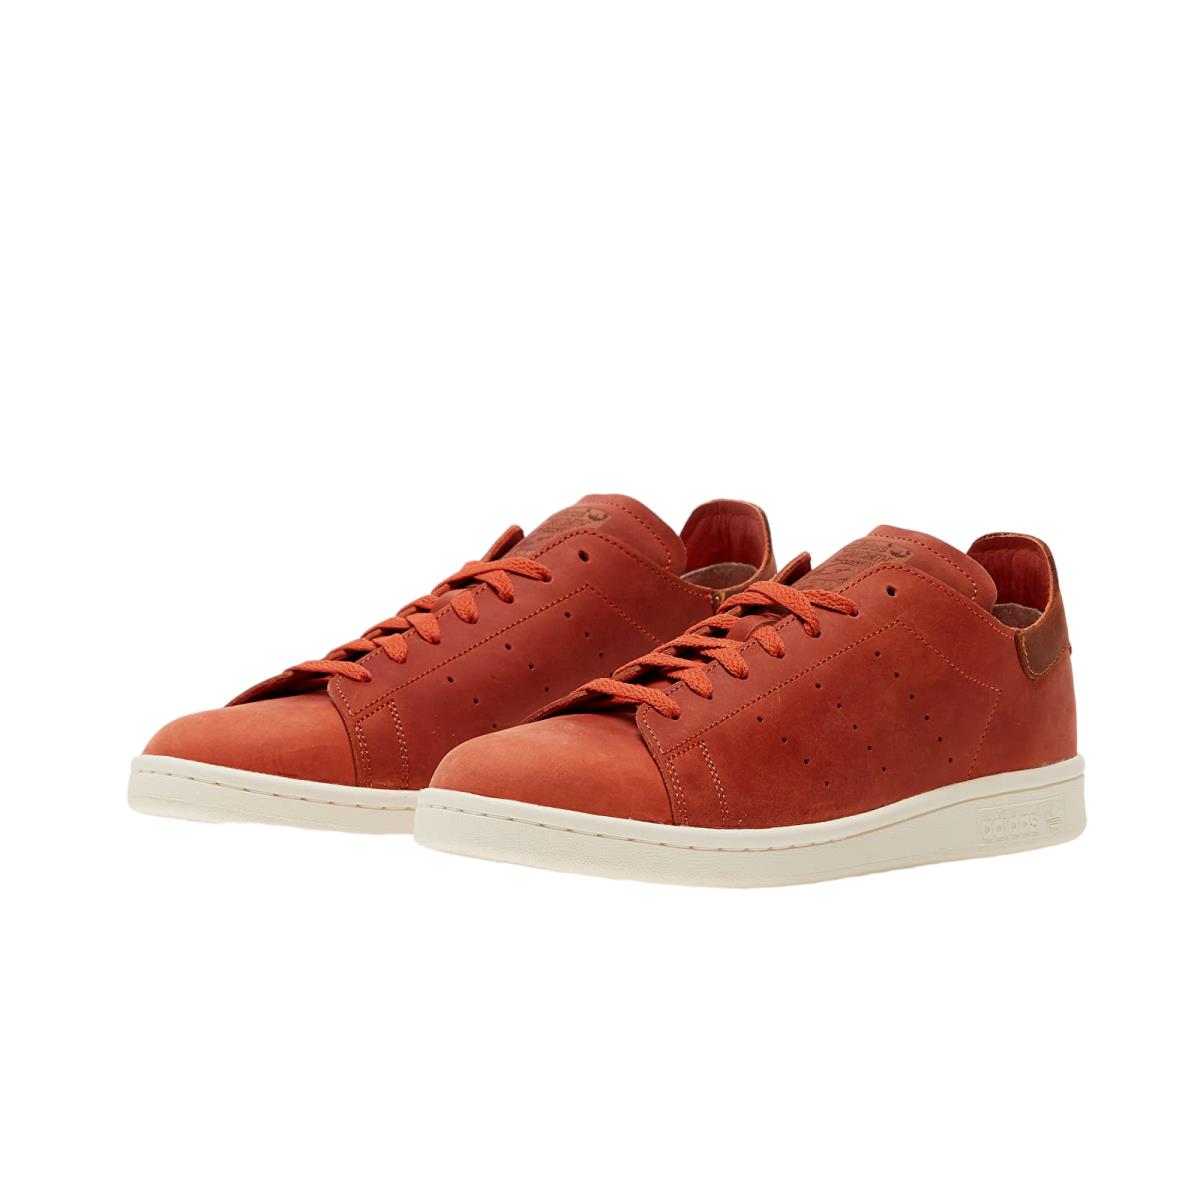 Men`s Adidas Originals Surf Red Leather Stan Smith Recon Sneakers HO3703 - Red